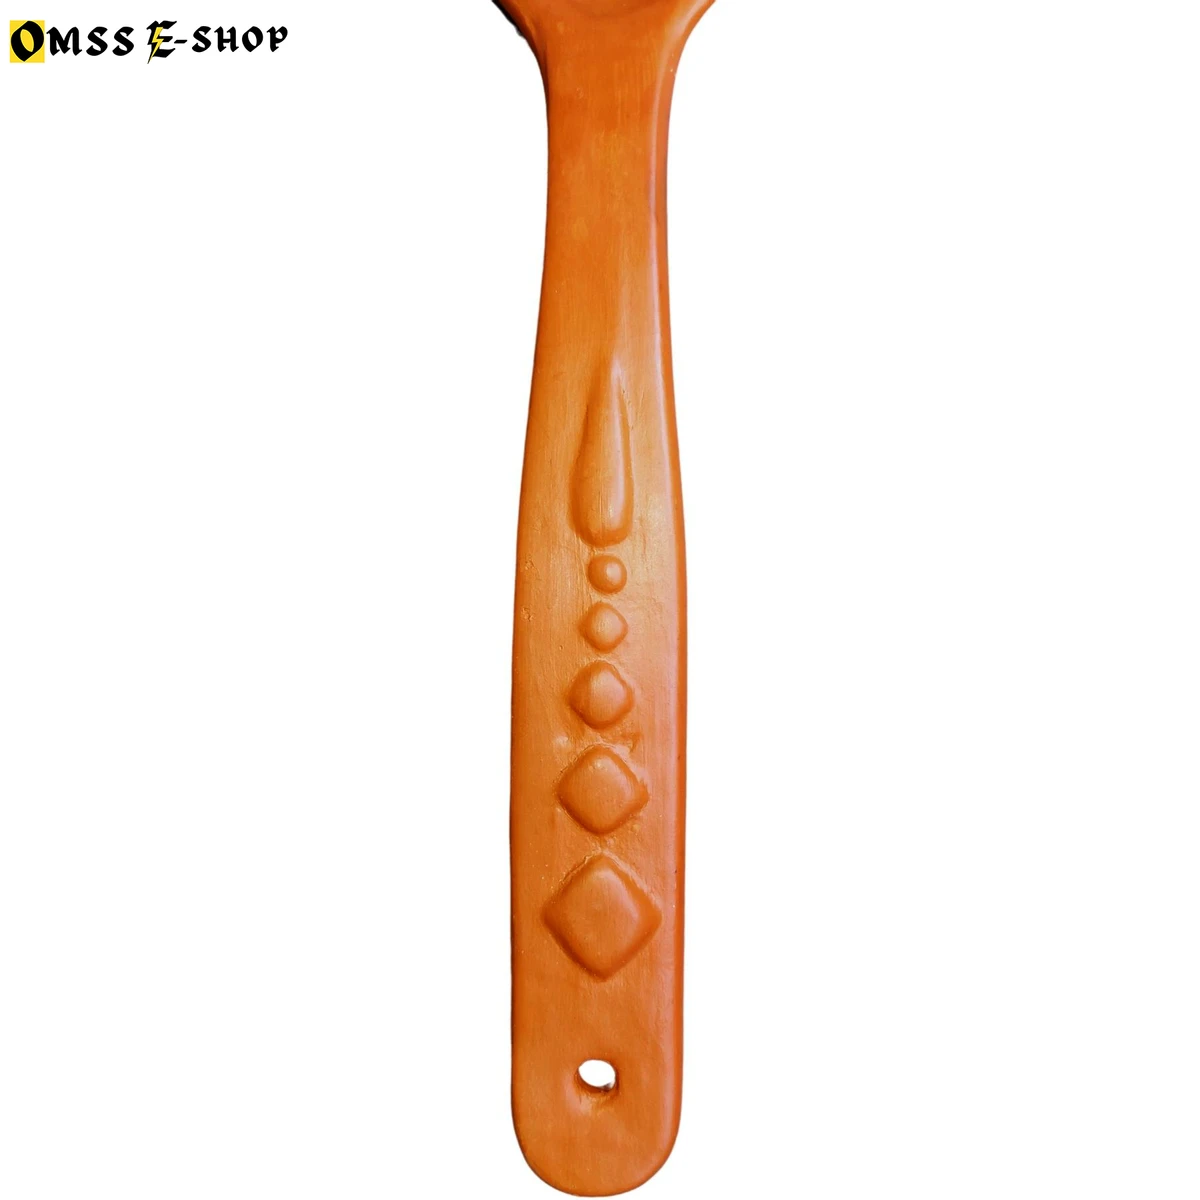 Newfangled - Beautiful And Durable terracotta Clay Spoon For Gravy Food Plain Dotted Design- Kitchen & Dining - Modern And Trendy- Vibes RP-70DH-OS